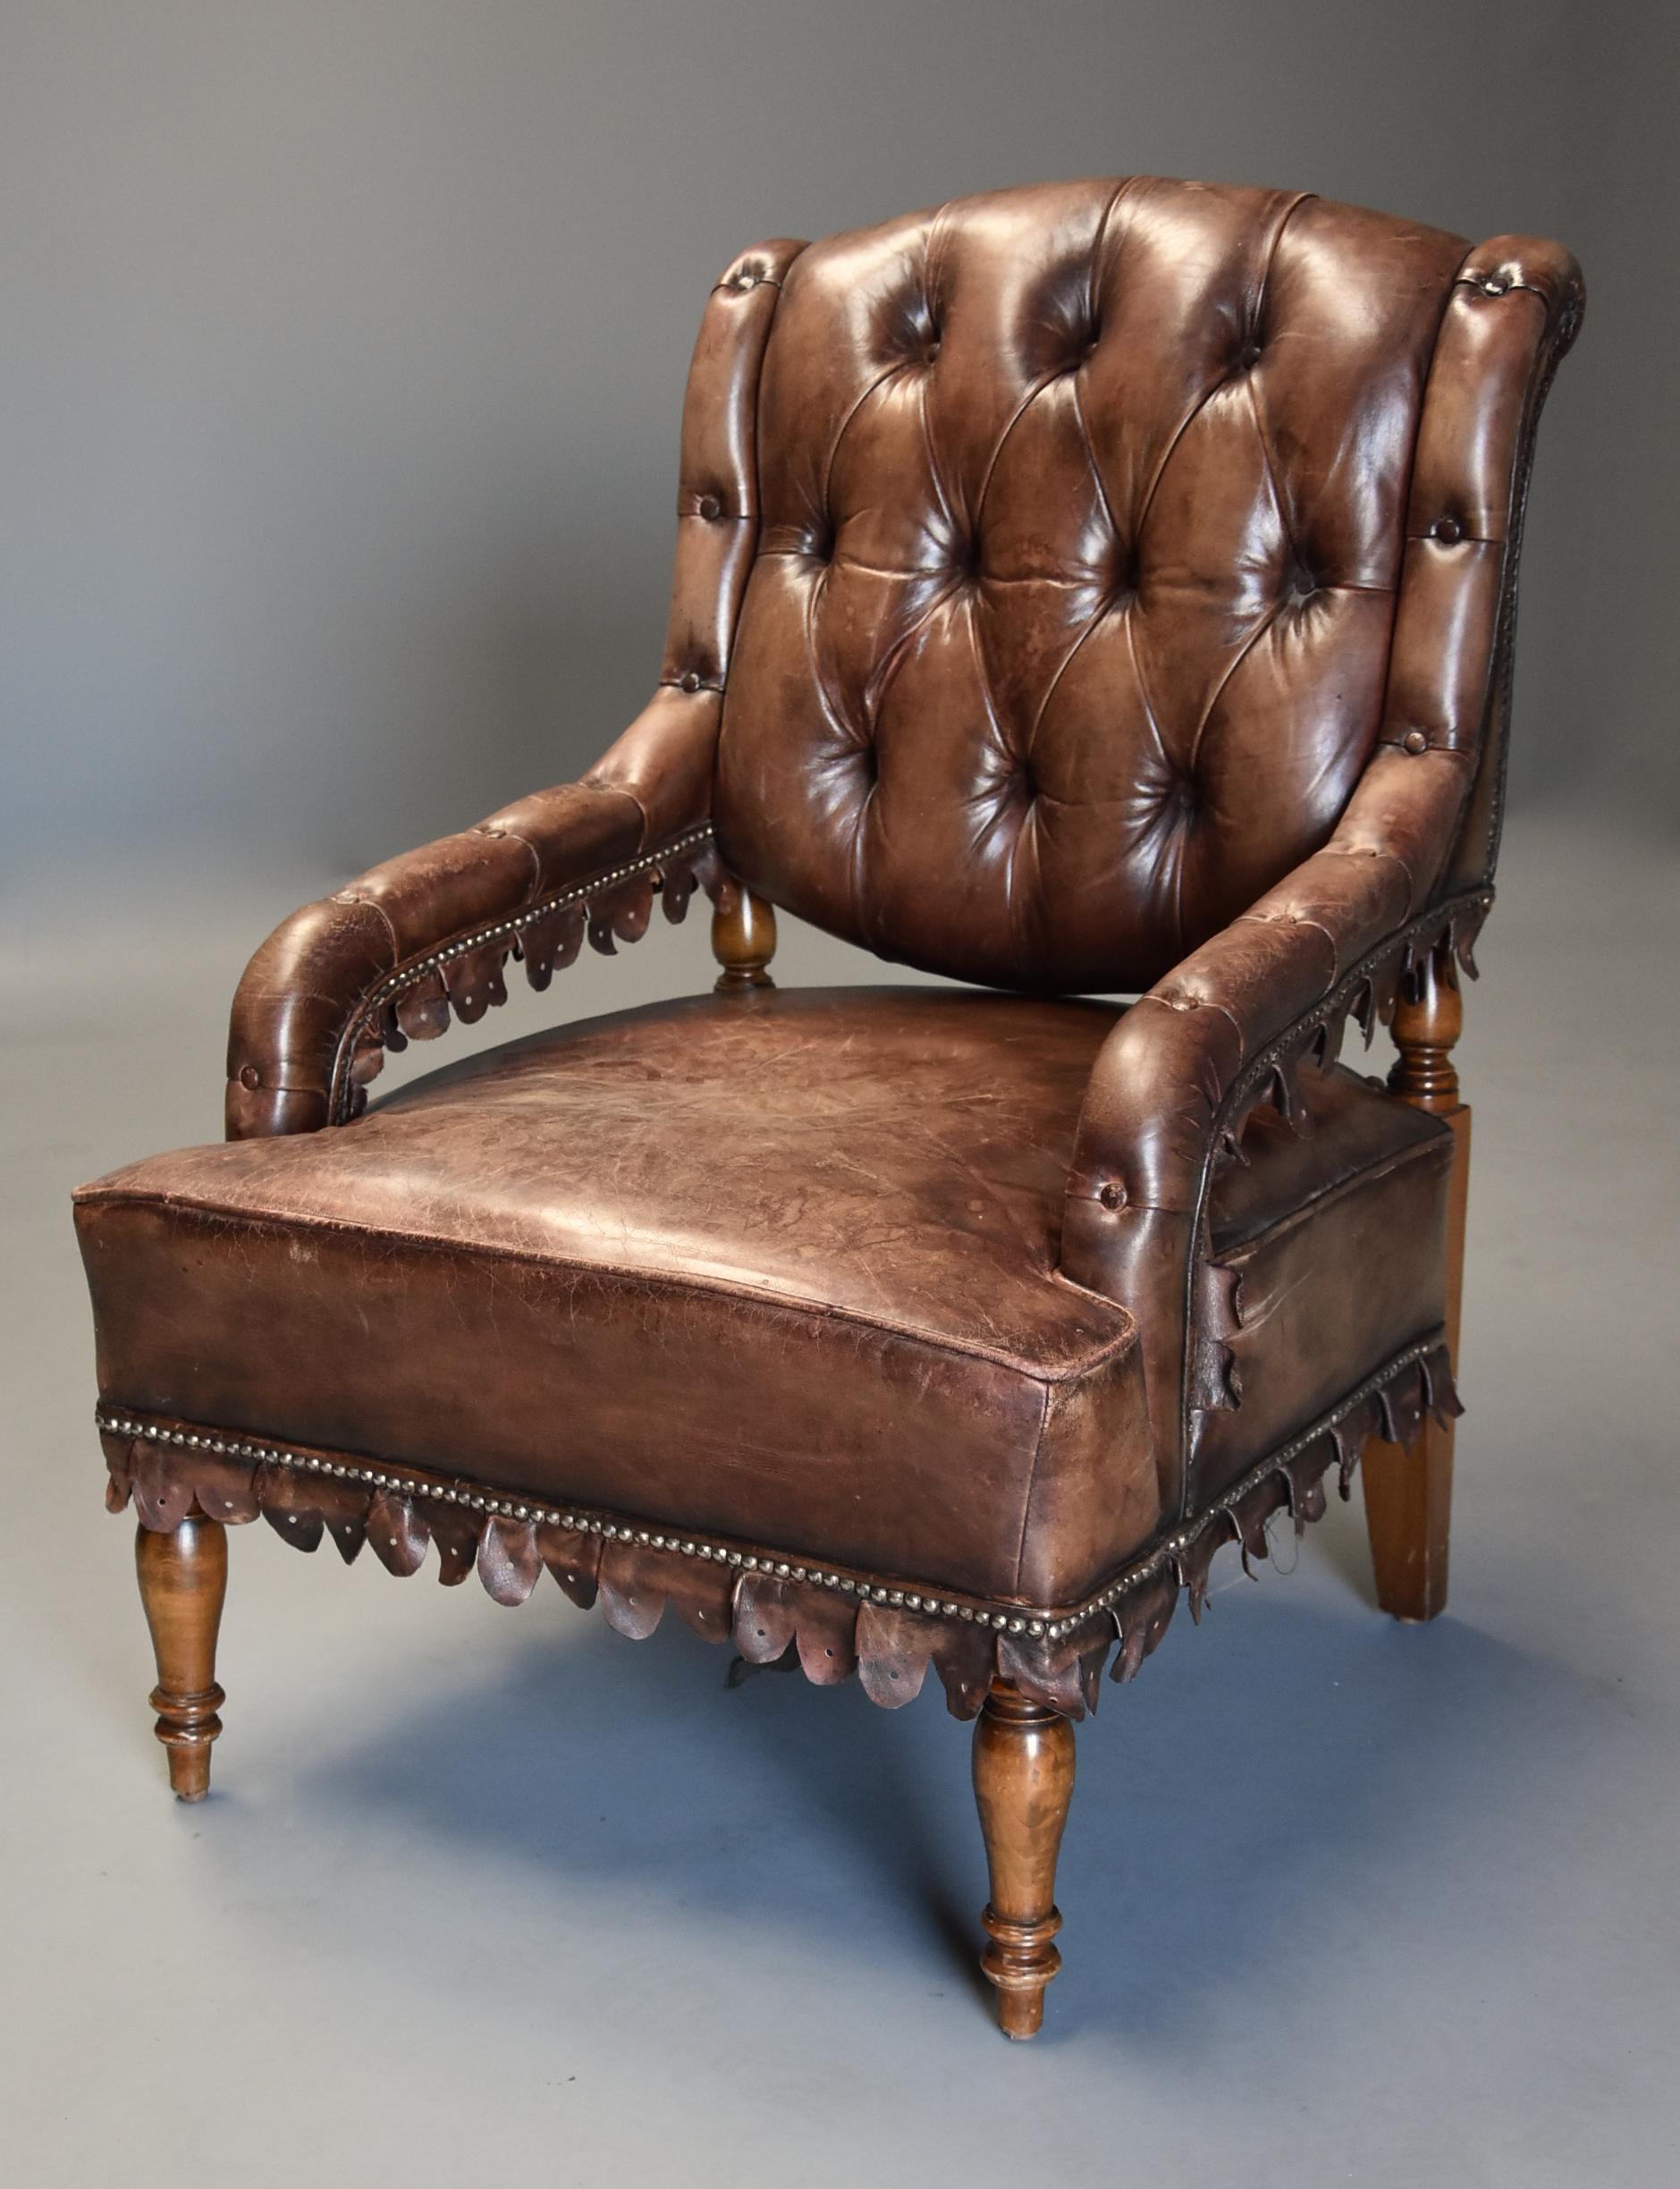 A highly decorative and unusual 1930s French brown leather open armchair, the leather of nicely worn appearance.

This chair consists of a shaped deep buttoned back with turned beech supports with deep buttoned leather arms with brass dome head